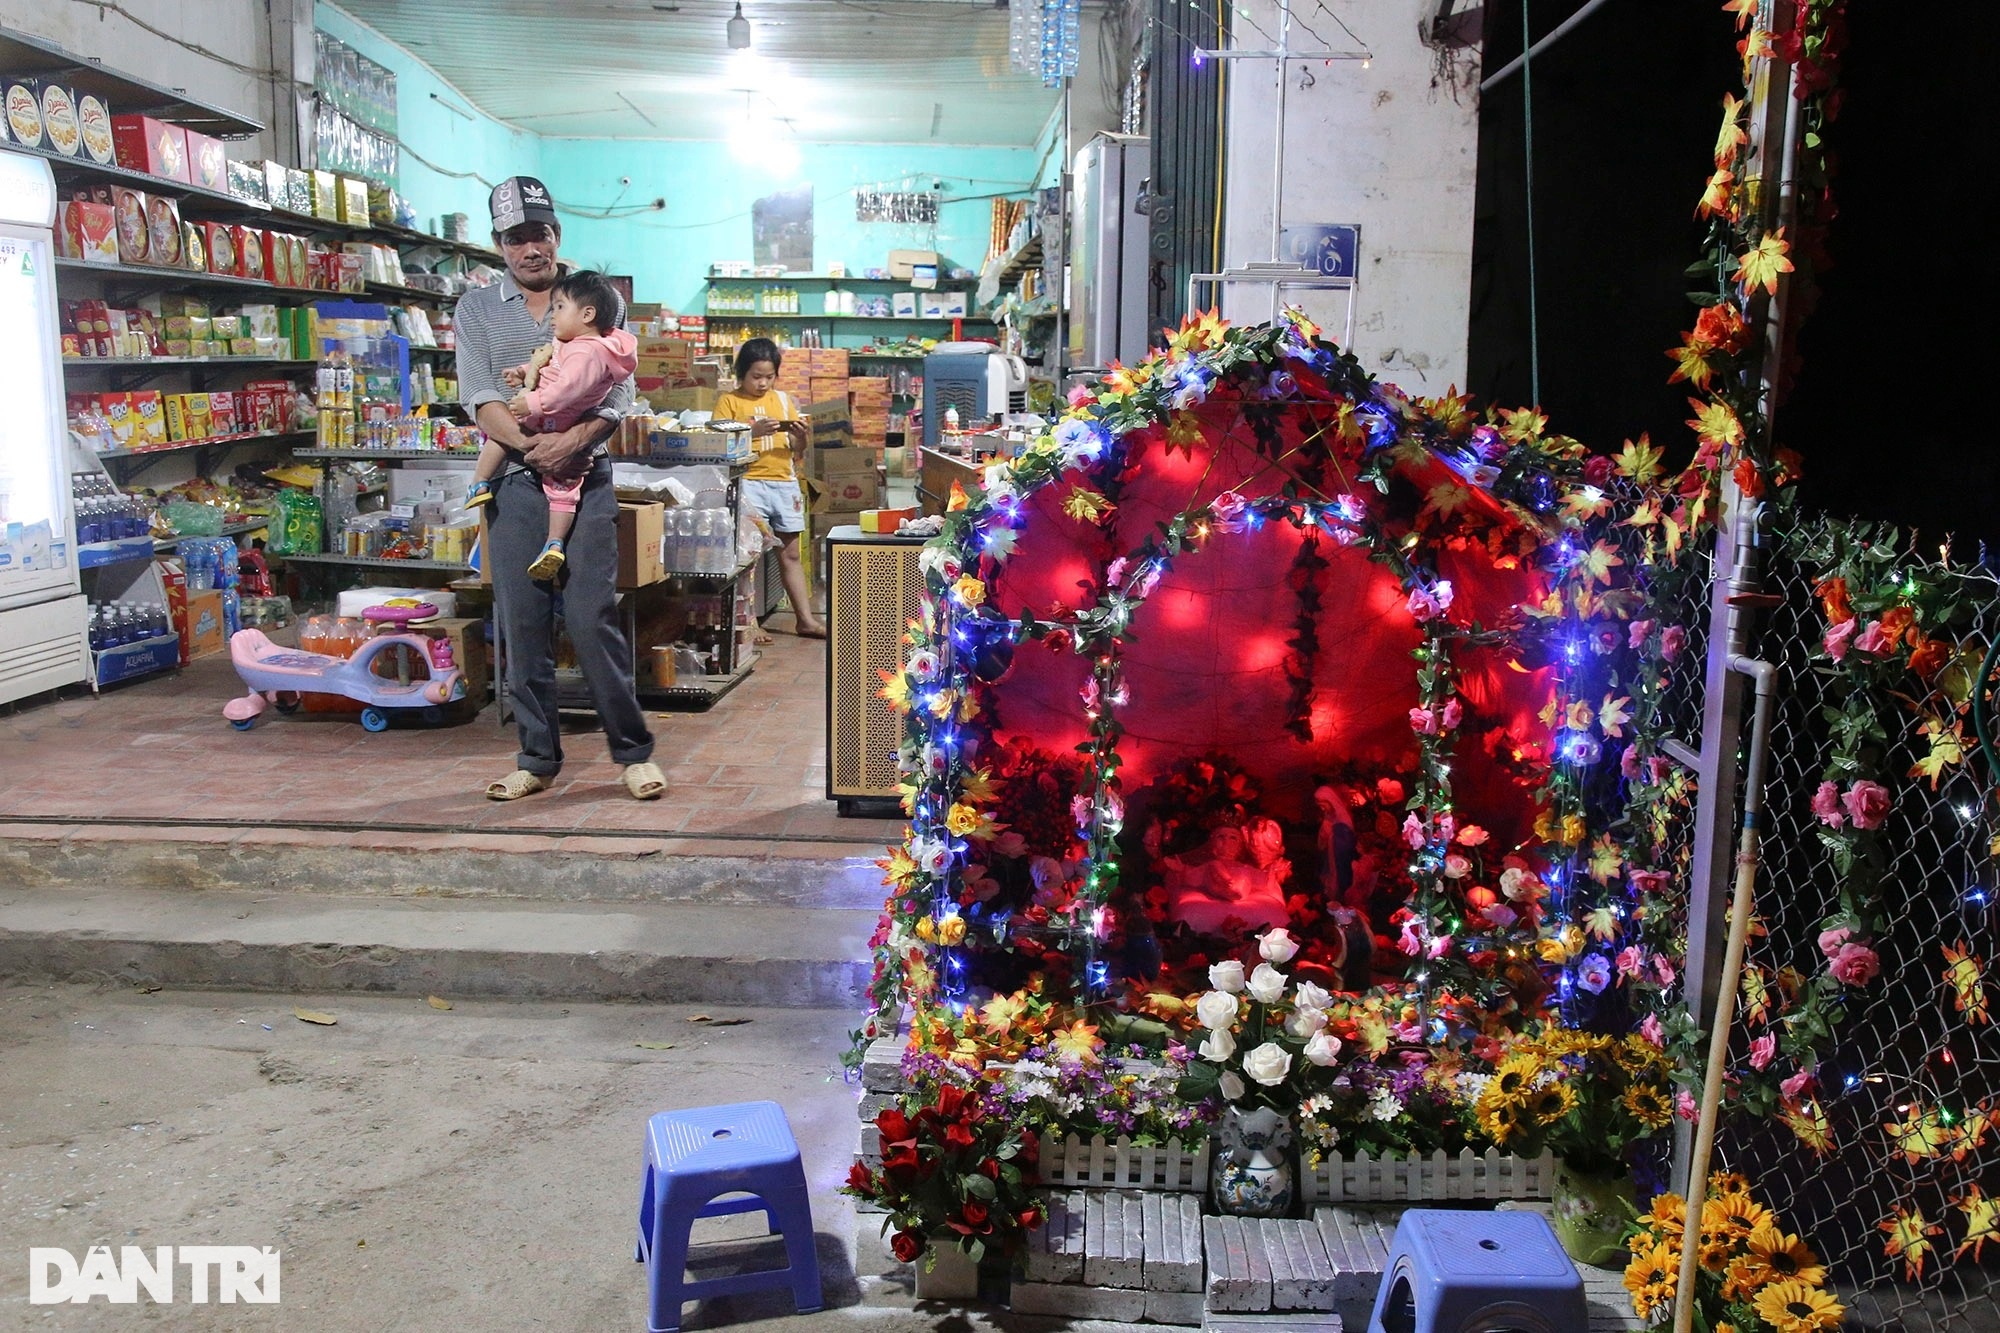 The village of more than 100 years old in Hanoi shimmers like a wonderland on Christmas - 12